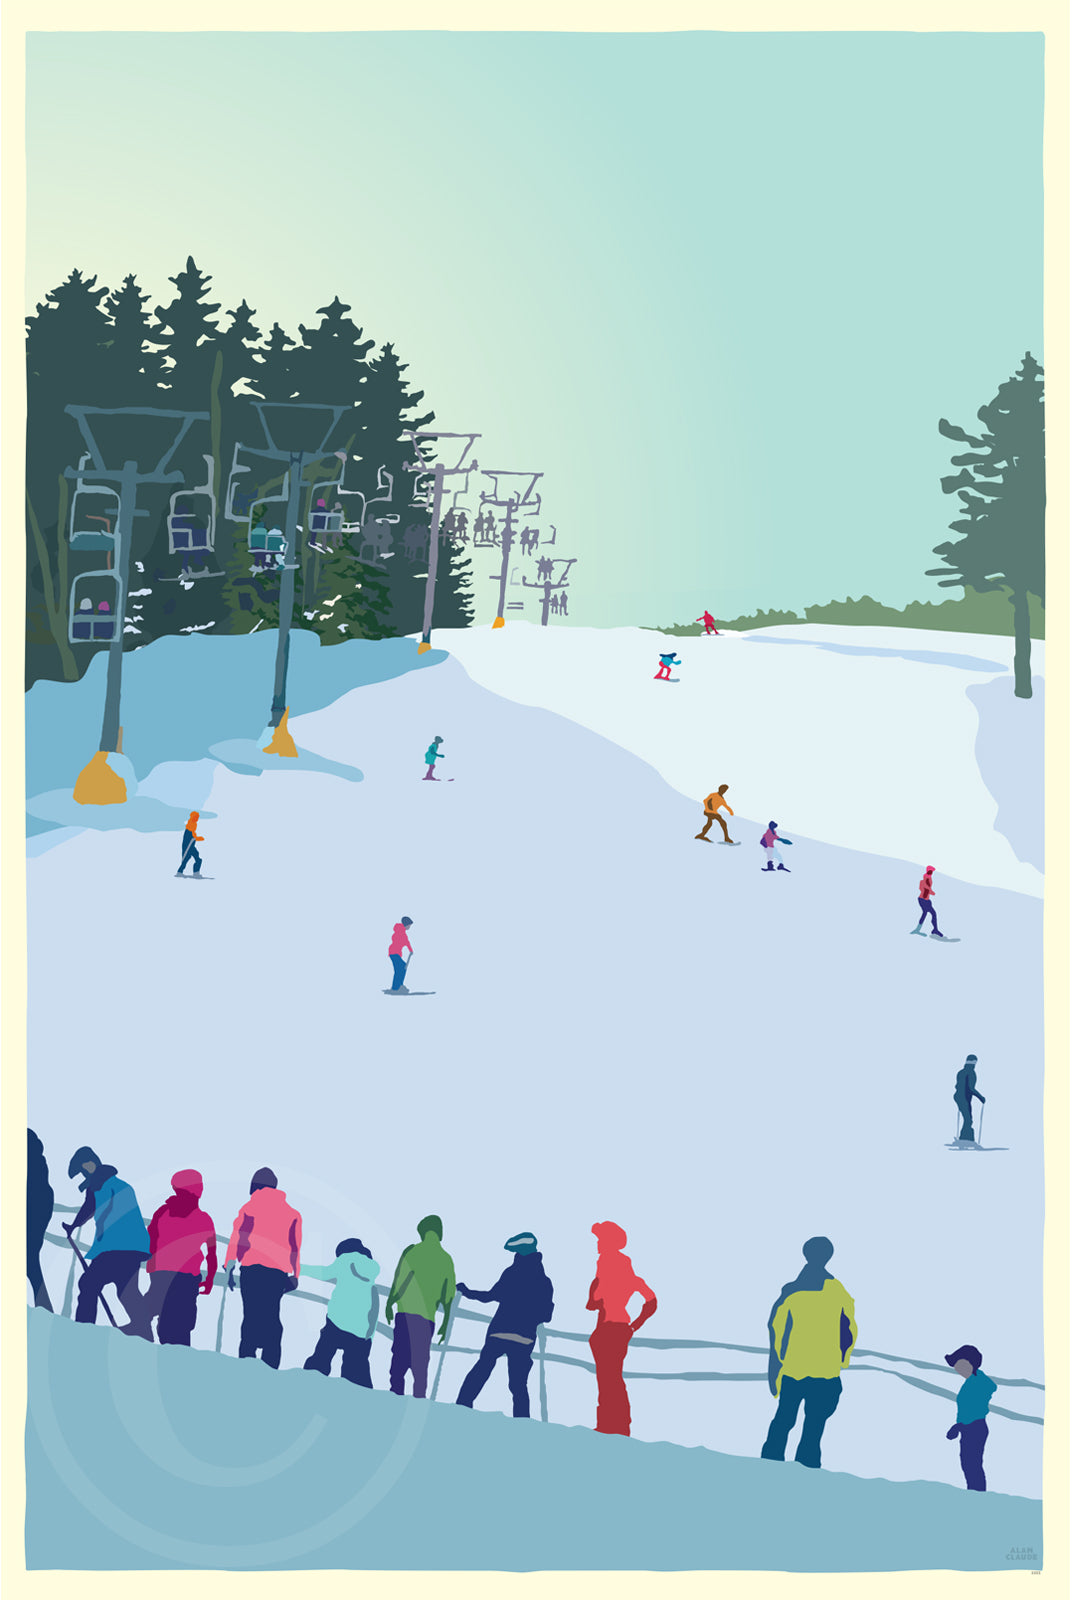 Skiing Snow Bowl Art Print 36" x 53" Framed Wall Poster - Maine